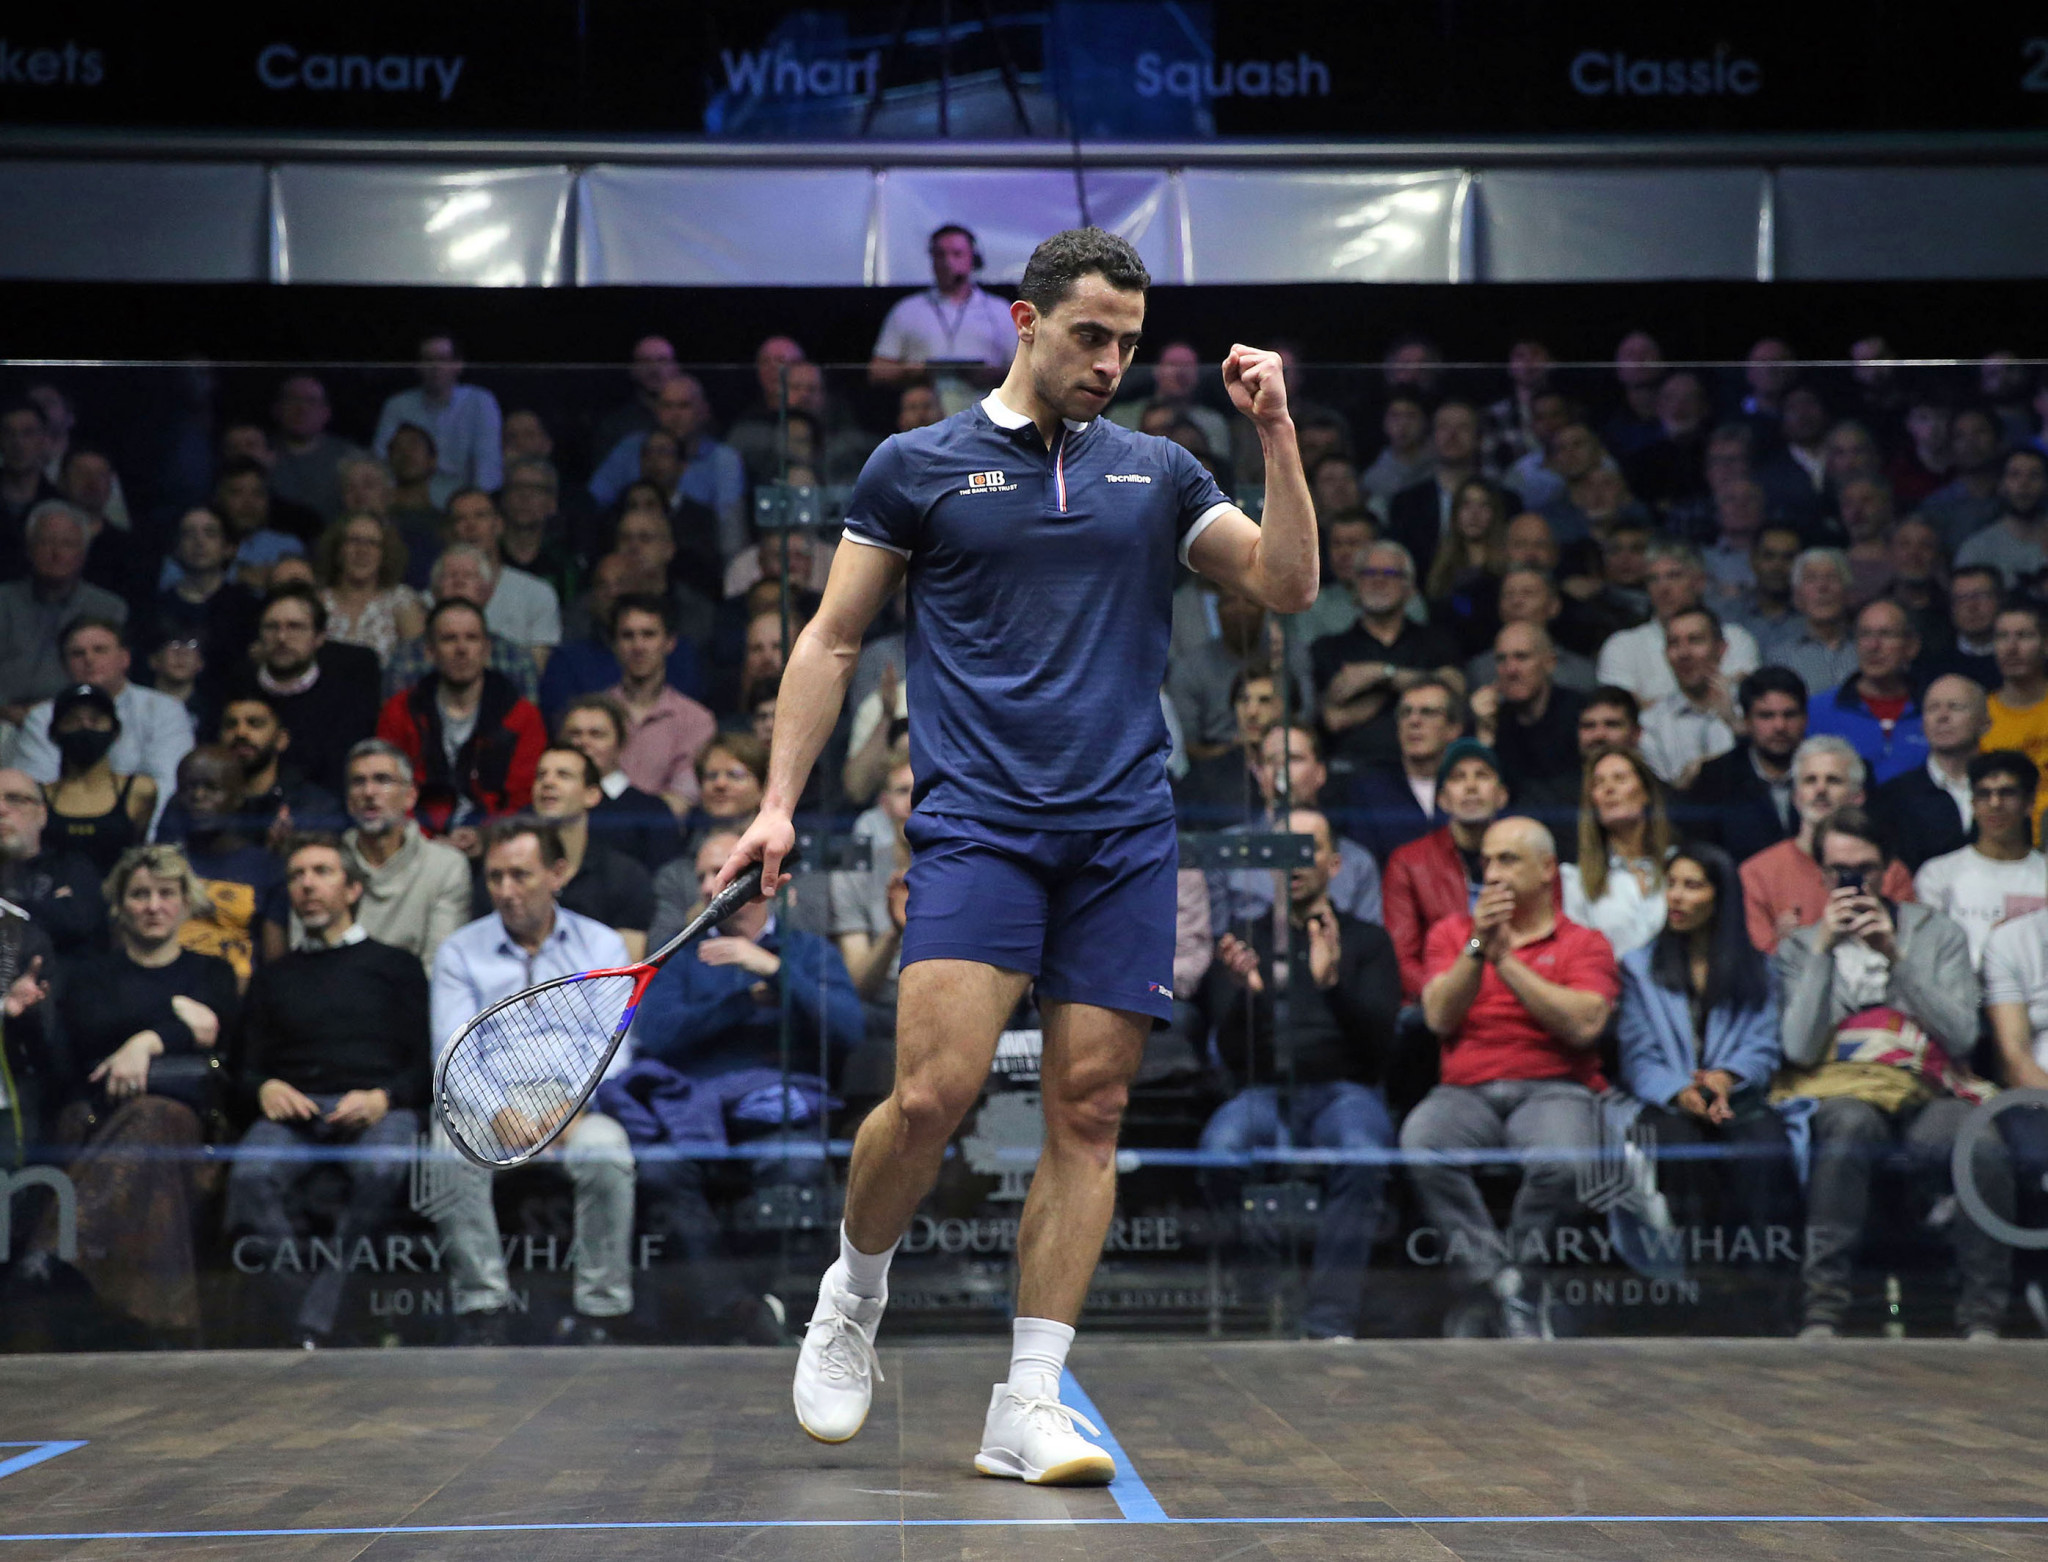 Egypt’s Dessouky to face compatriot Asal at Canary Wharf Classic final